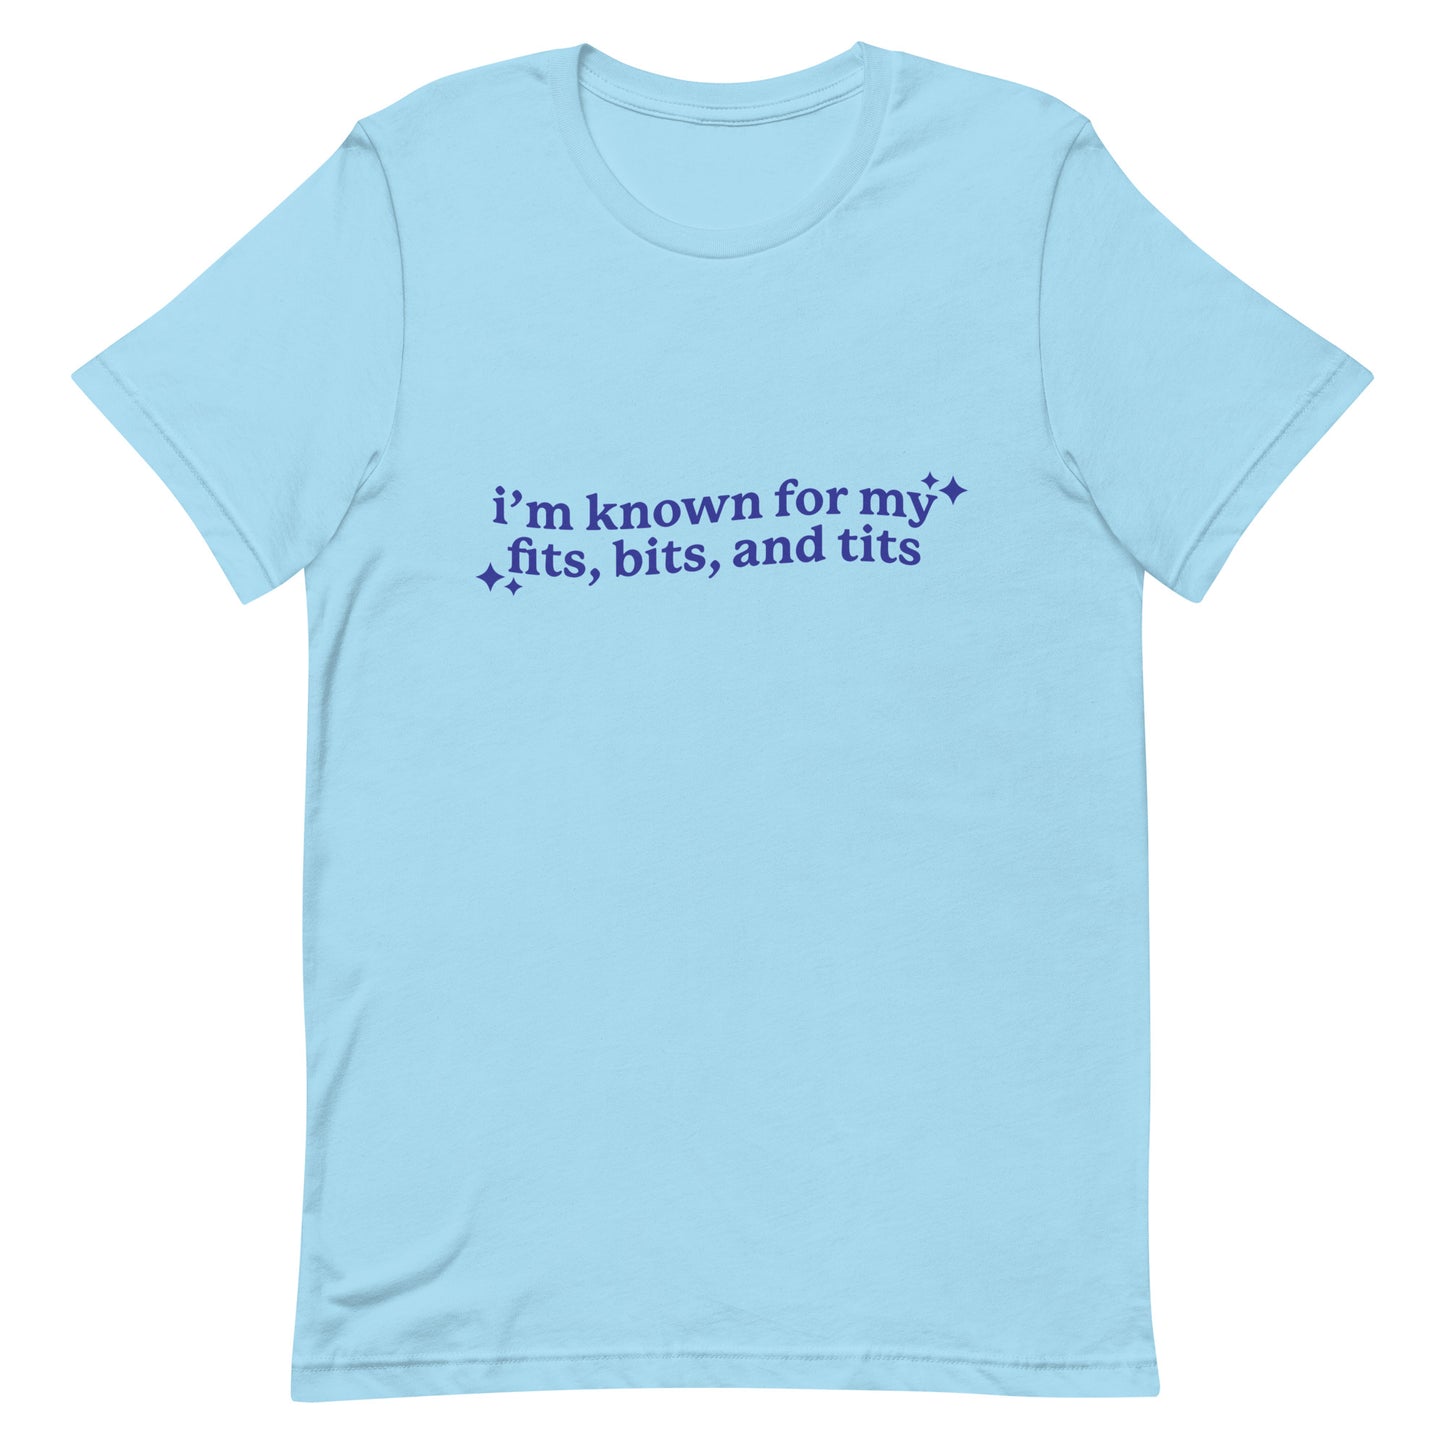 I'm Known For My Fits, Bits, and Tits Unisex t-shirt